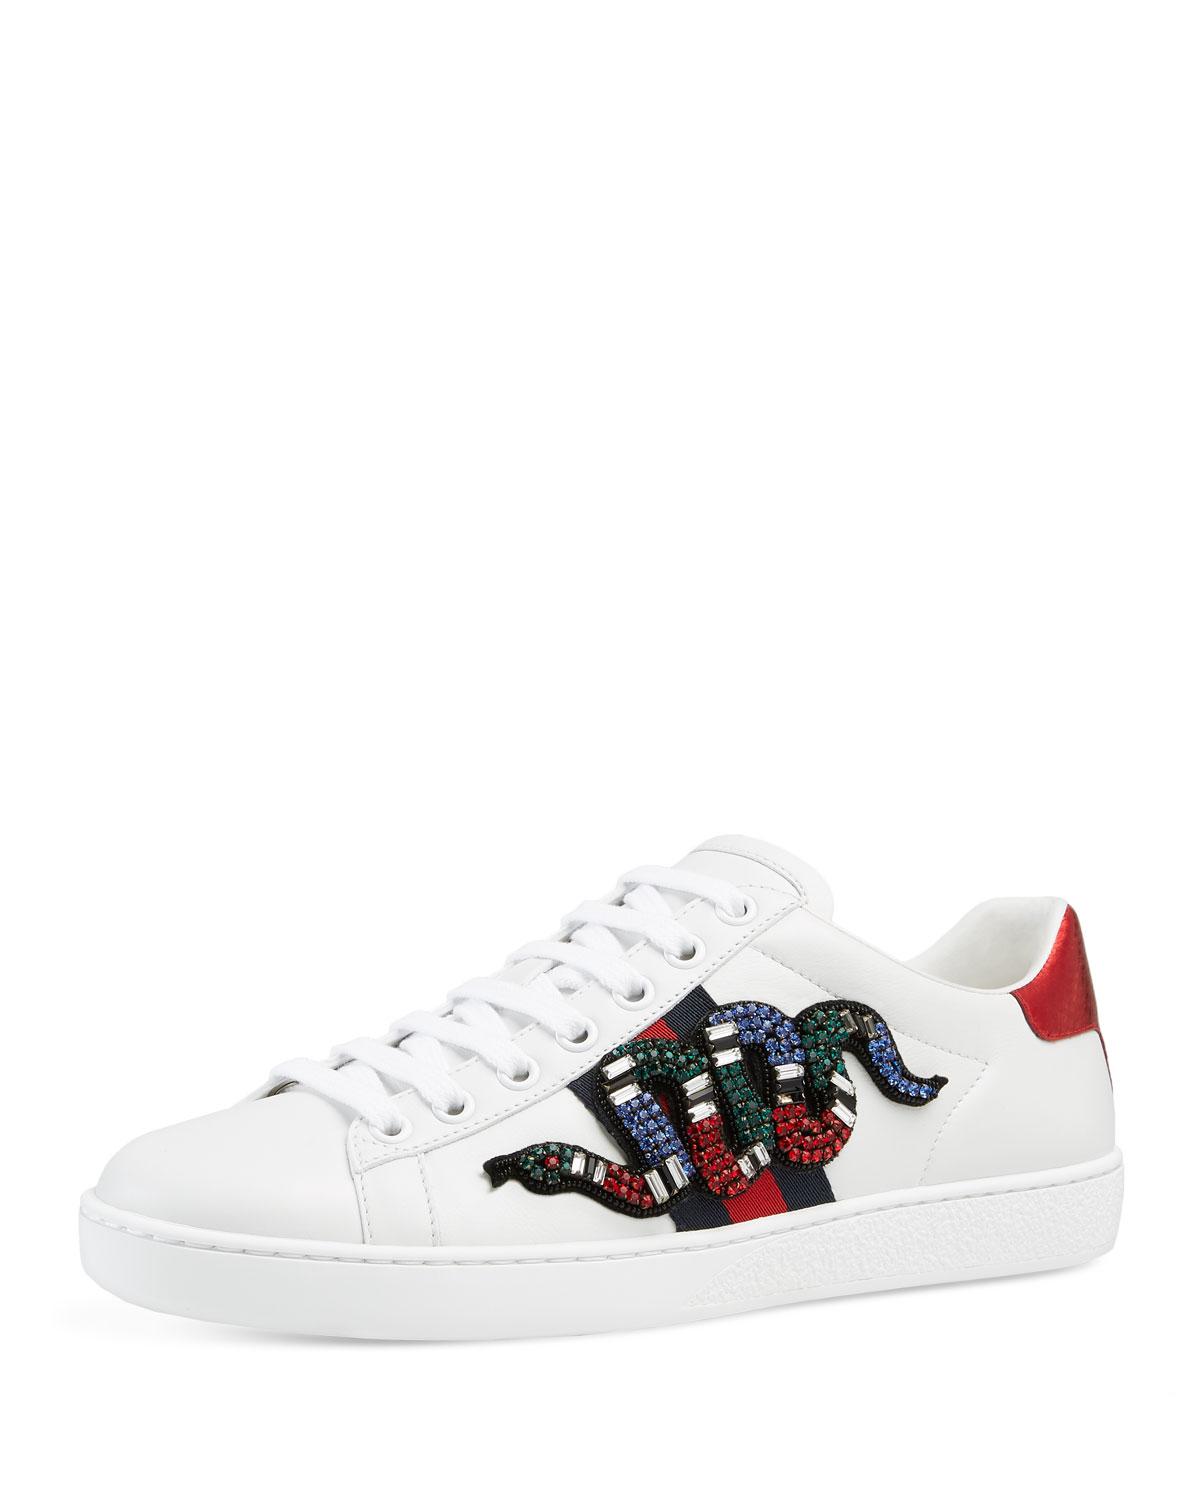 gucci mens shoes snake, OFF 78%,www 